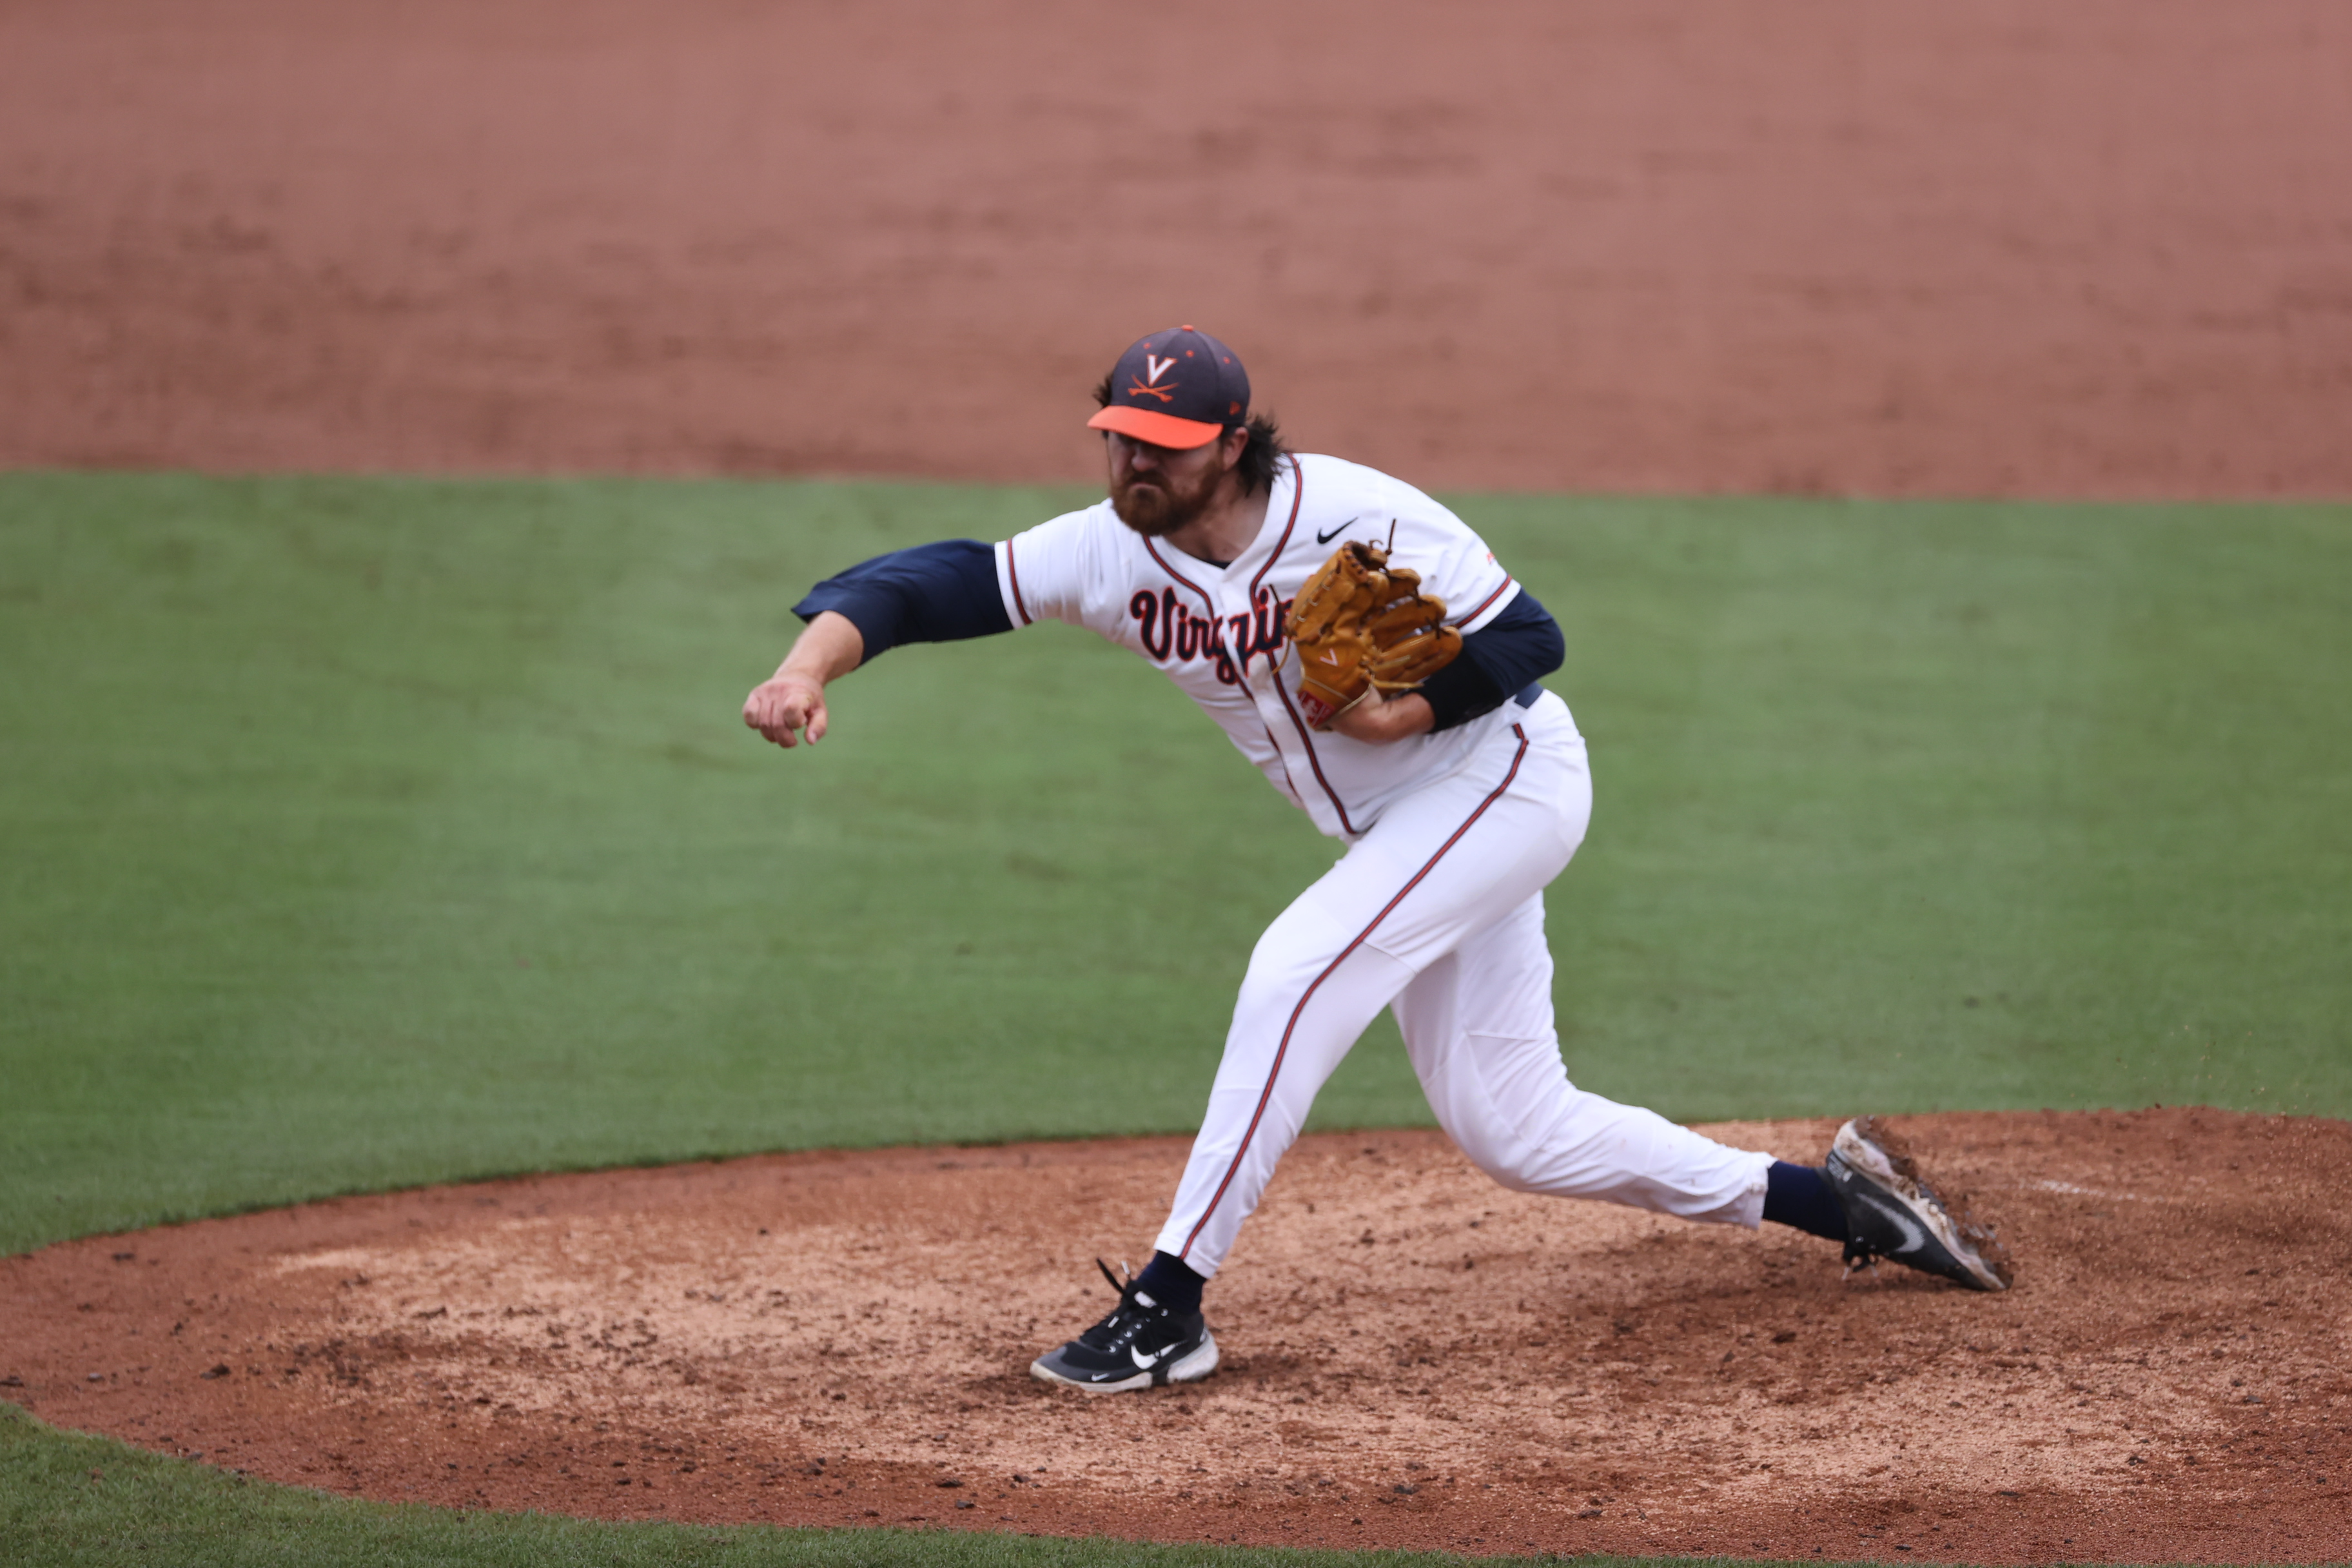 Virginia is headed to its seventh Super Regional.